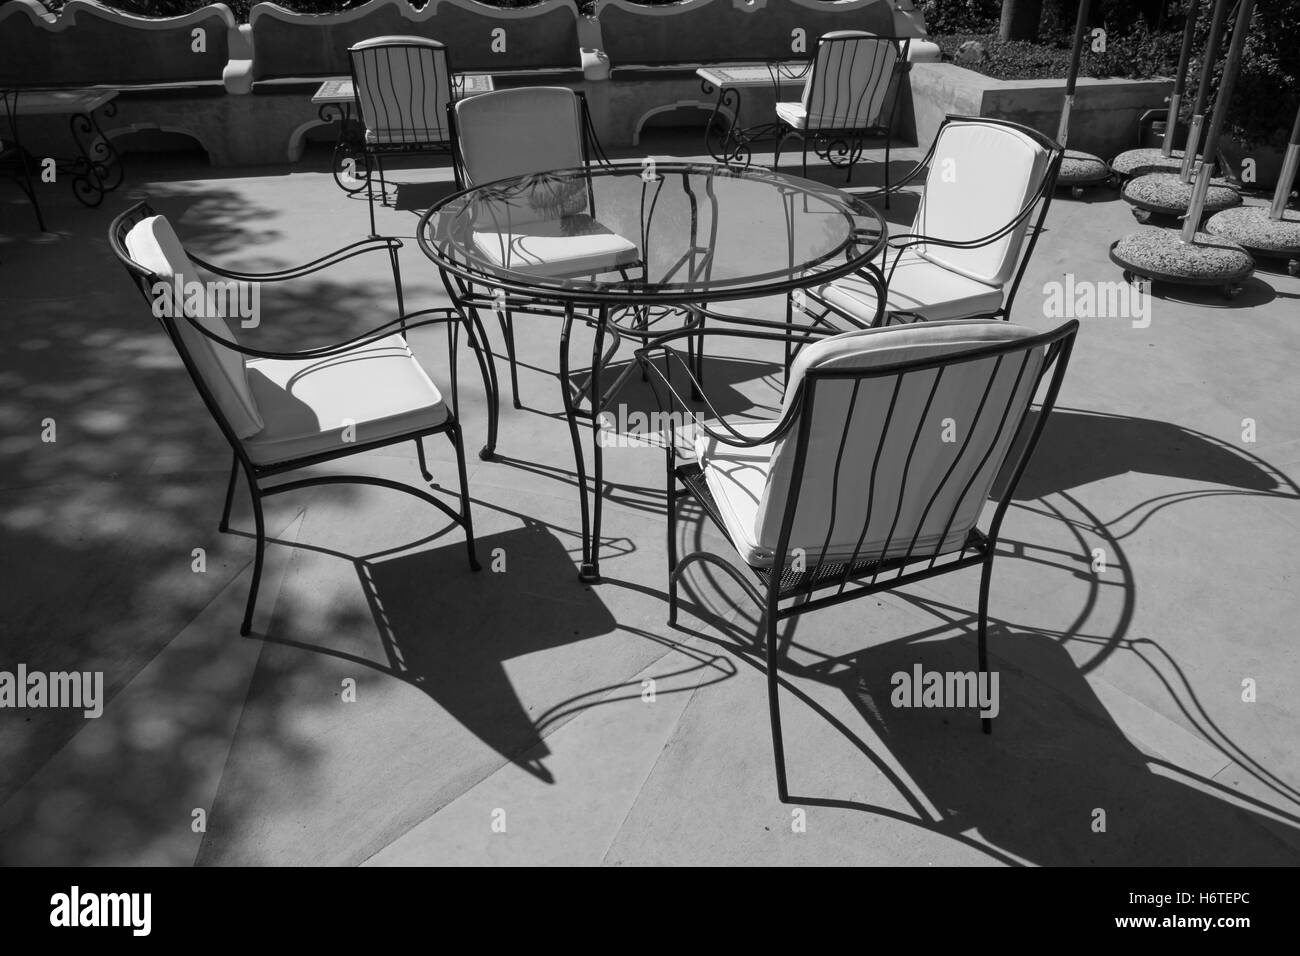 Furniture, patio, metal, black, iron, wrought, outdoor, chair, garden, empty, design, relax, table, white, ornate, seat, relax. Stock Photo